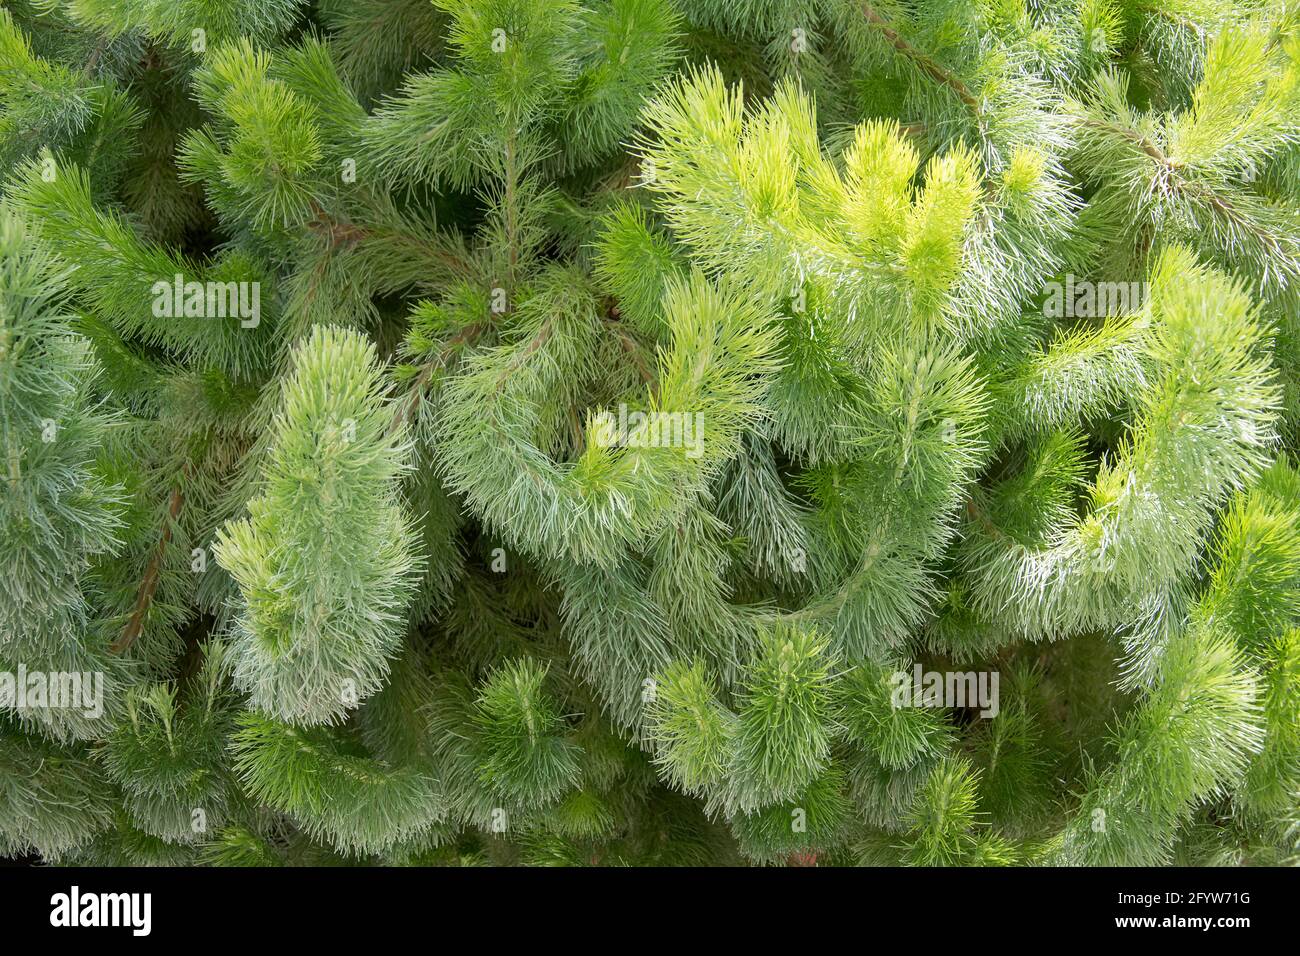 Adenanthos sericeus also commonly known as woolly bush. Stock Photo